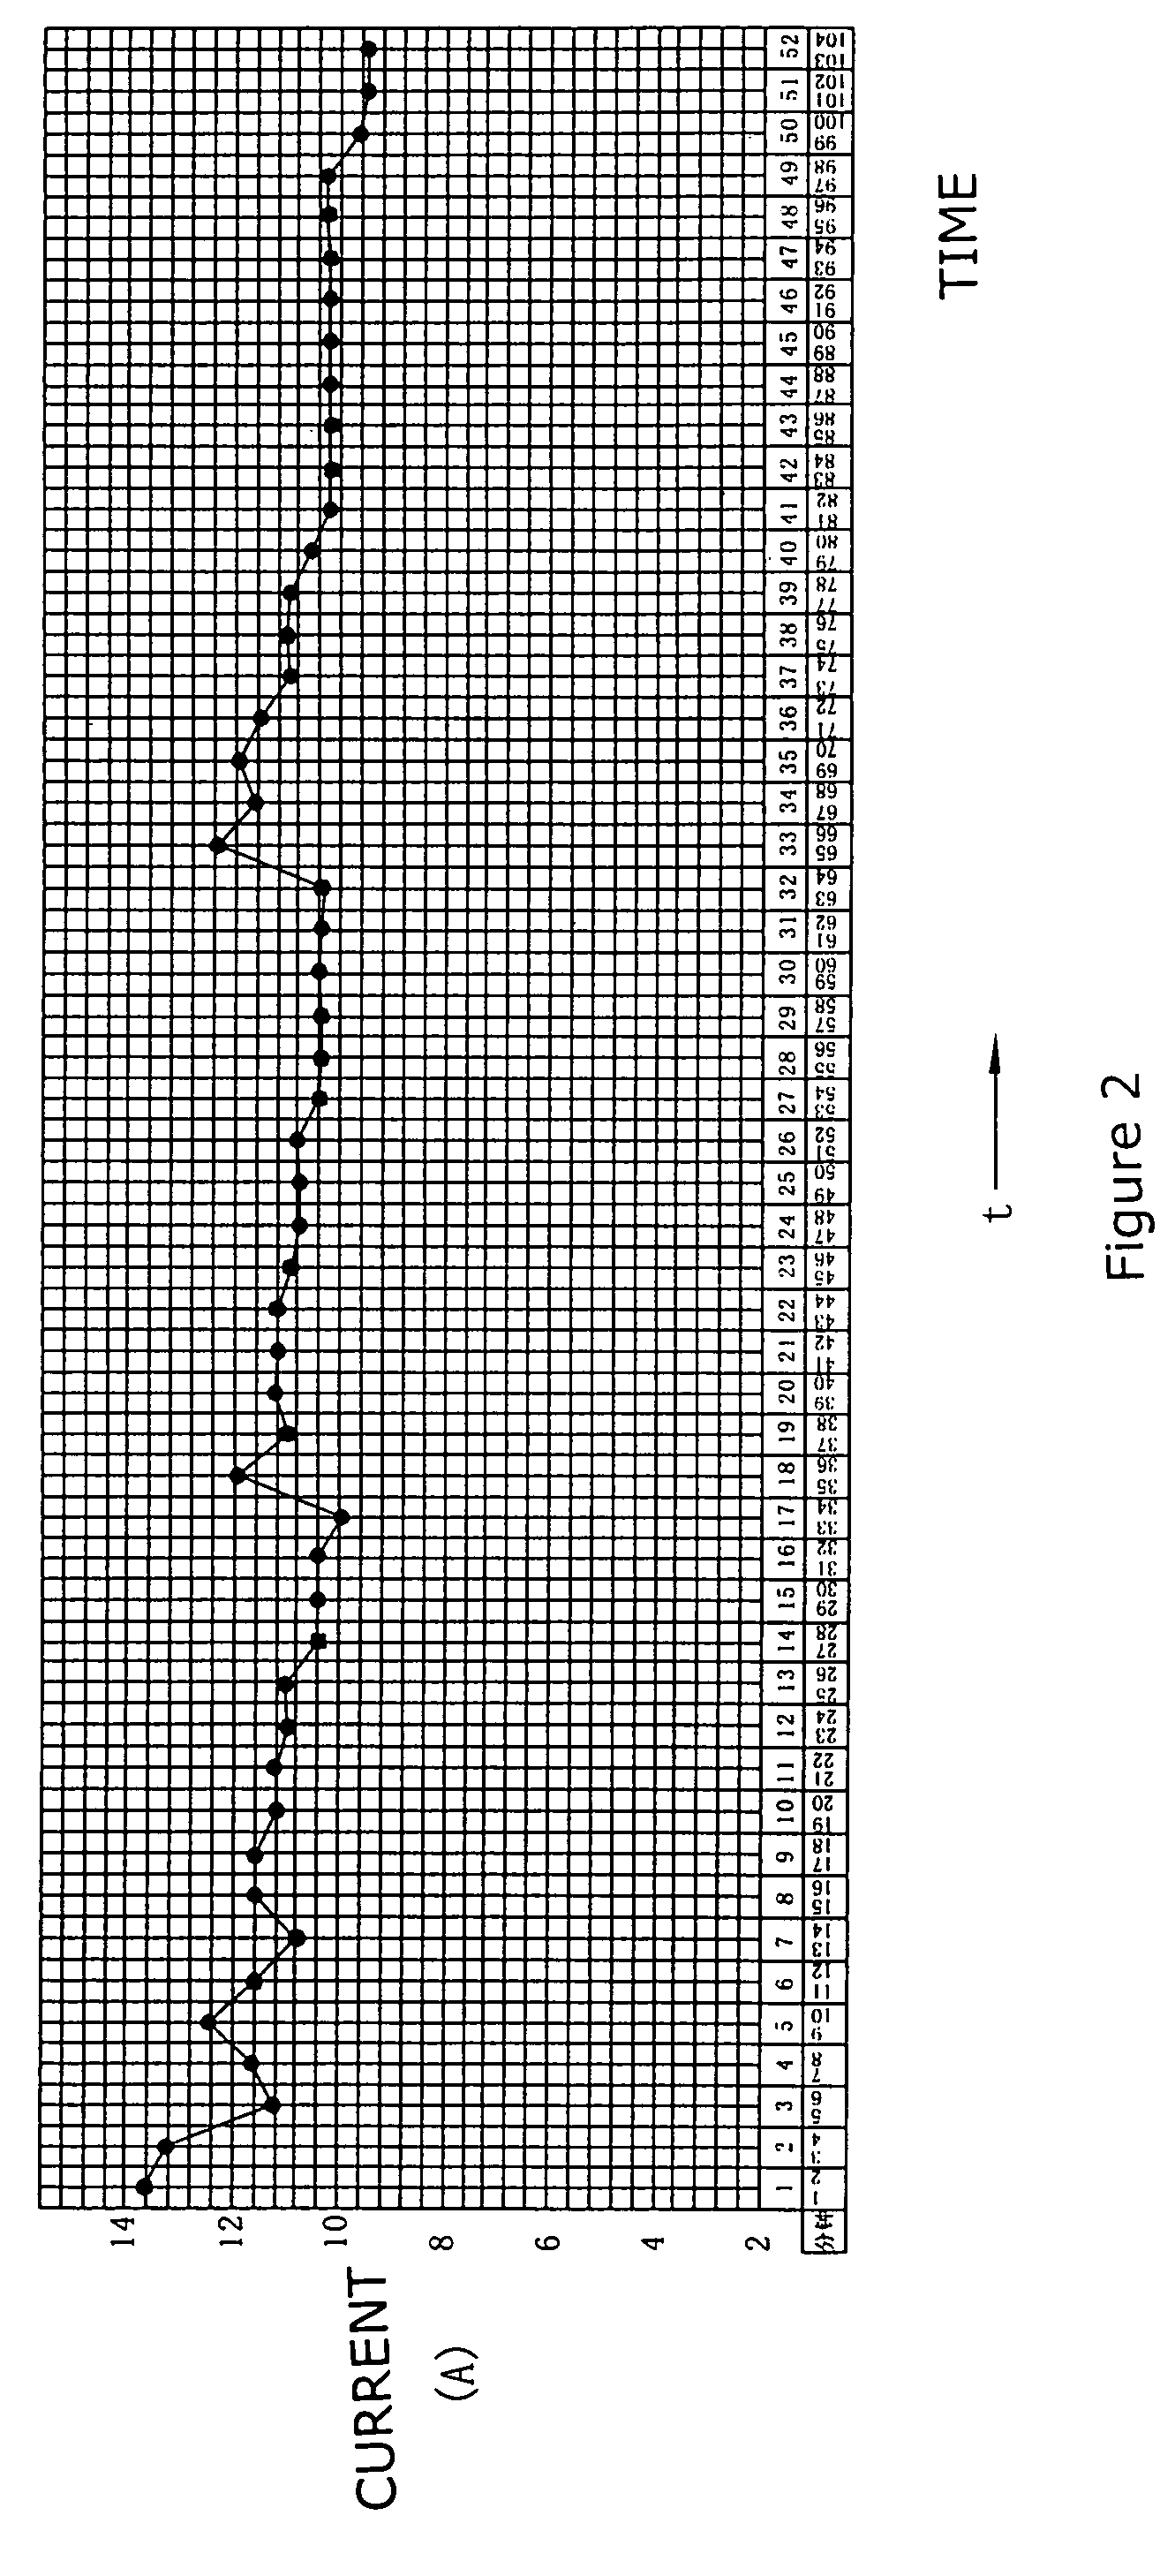 Liquid low-sodium silicate electrolyte used for a storage battery and manufactured by magnetization process, and the usage thereof